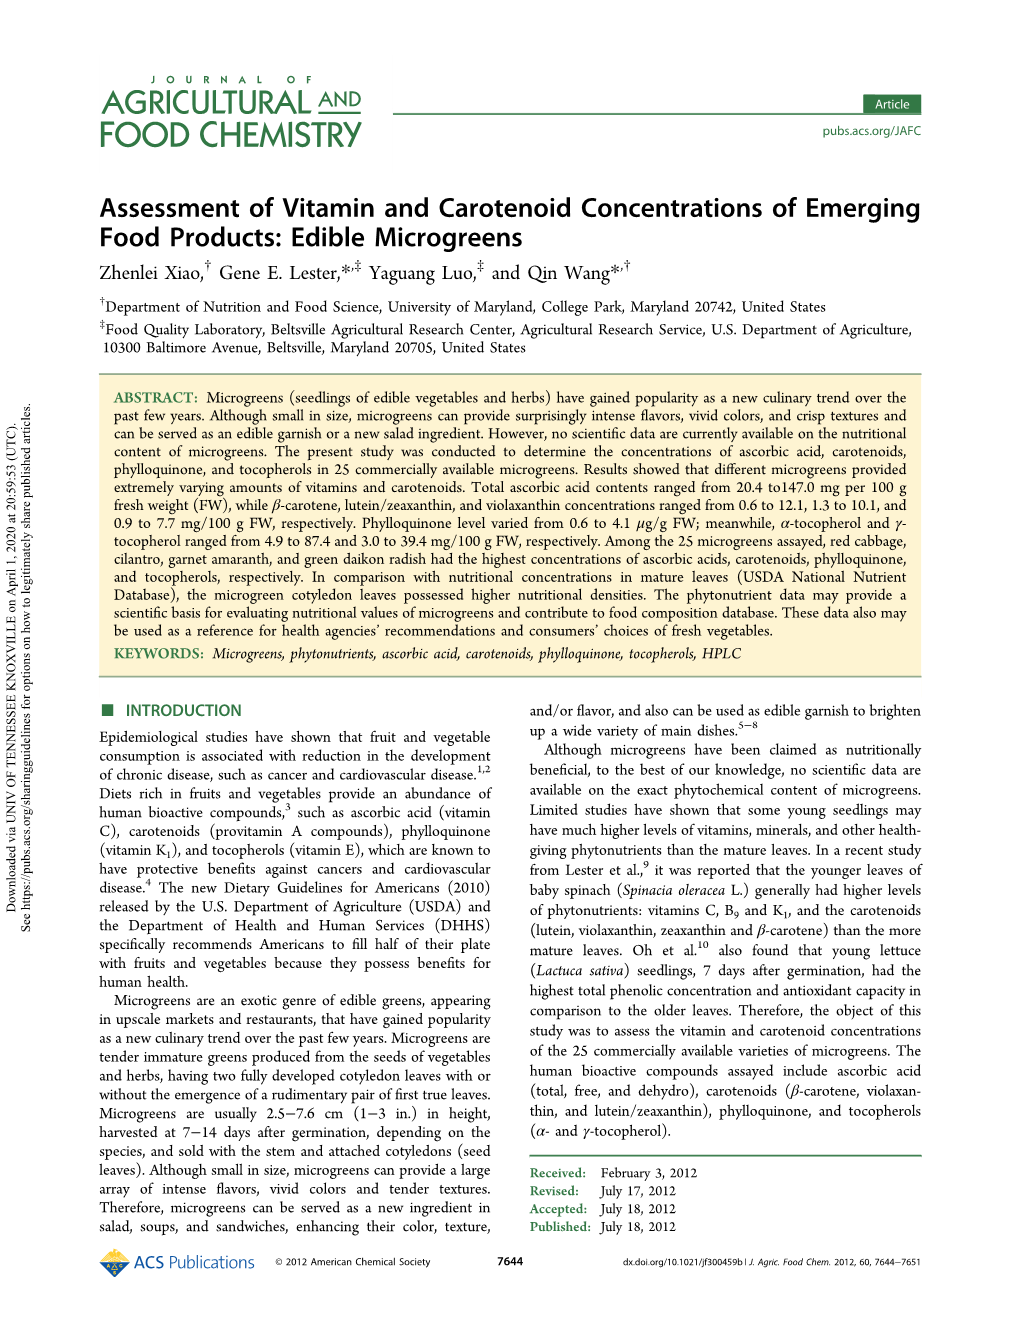 Assessment of Vitamin and Carotenoid Concentrations of Emerging Food Products: Edible Microgreens † ‡ ‡ † Zhenlei Xiao, Gene E